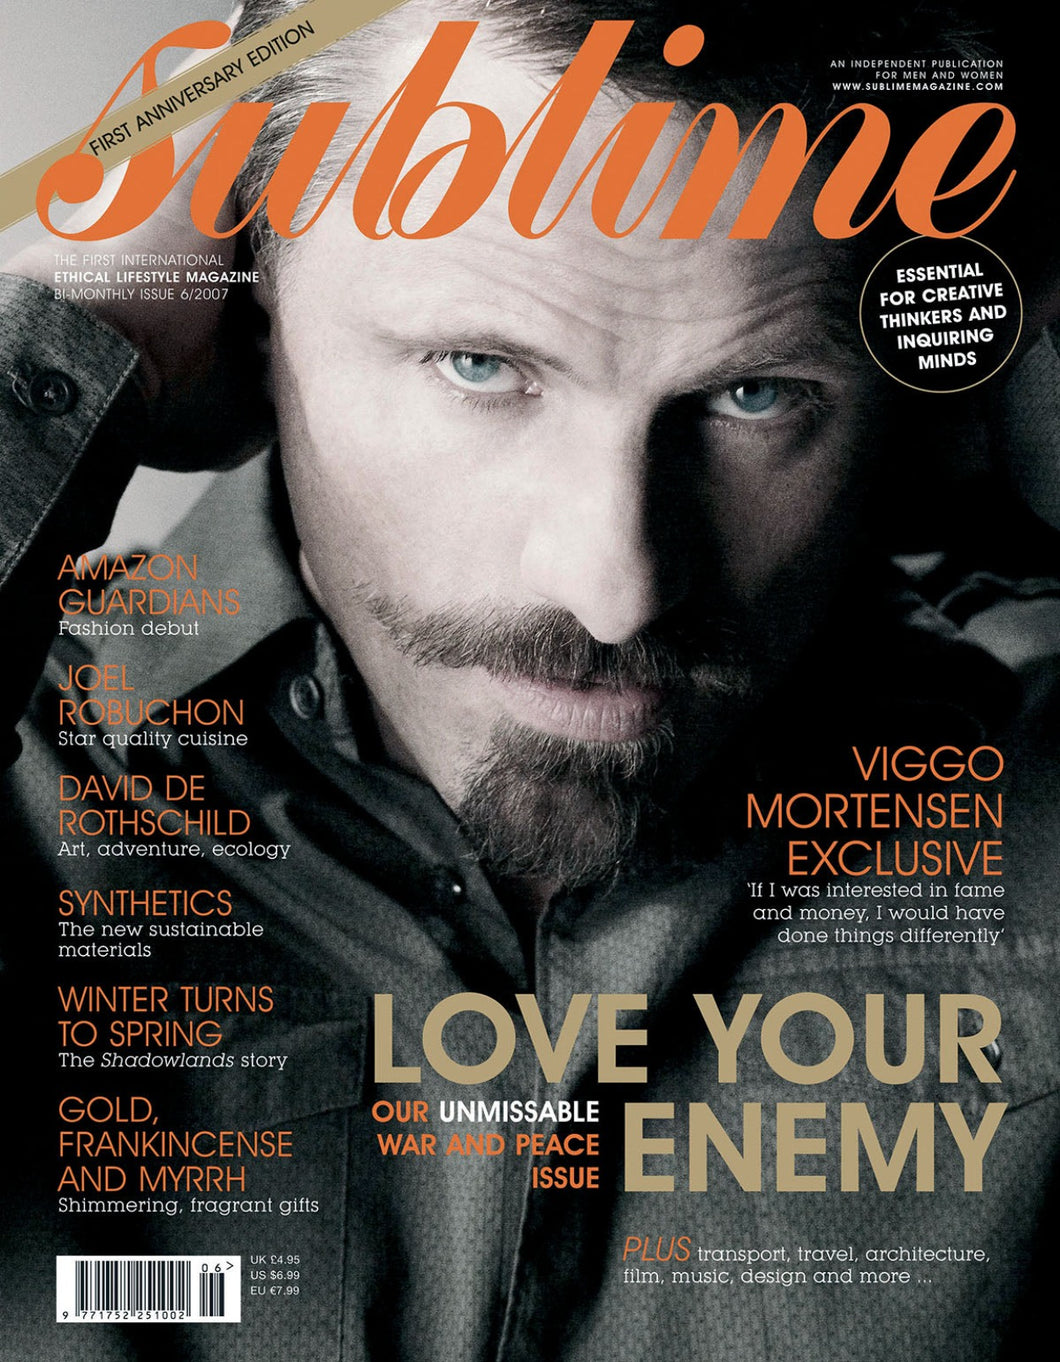 Issue 6 - Love Your Enemy